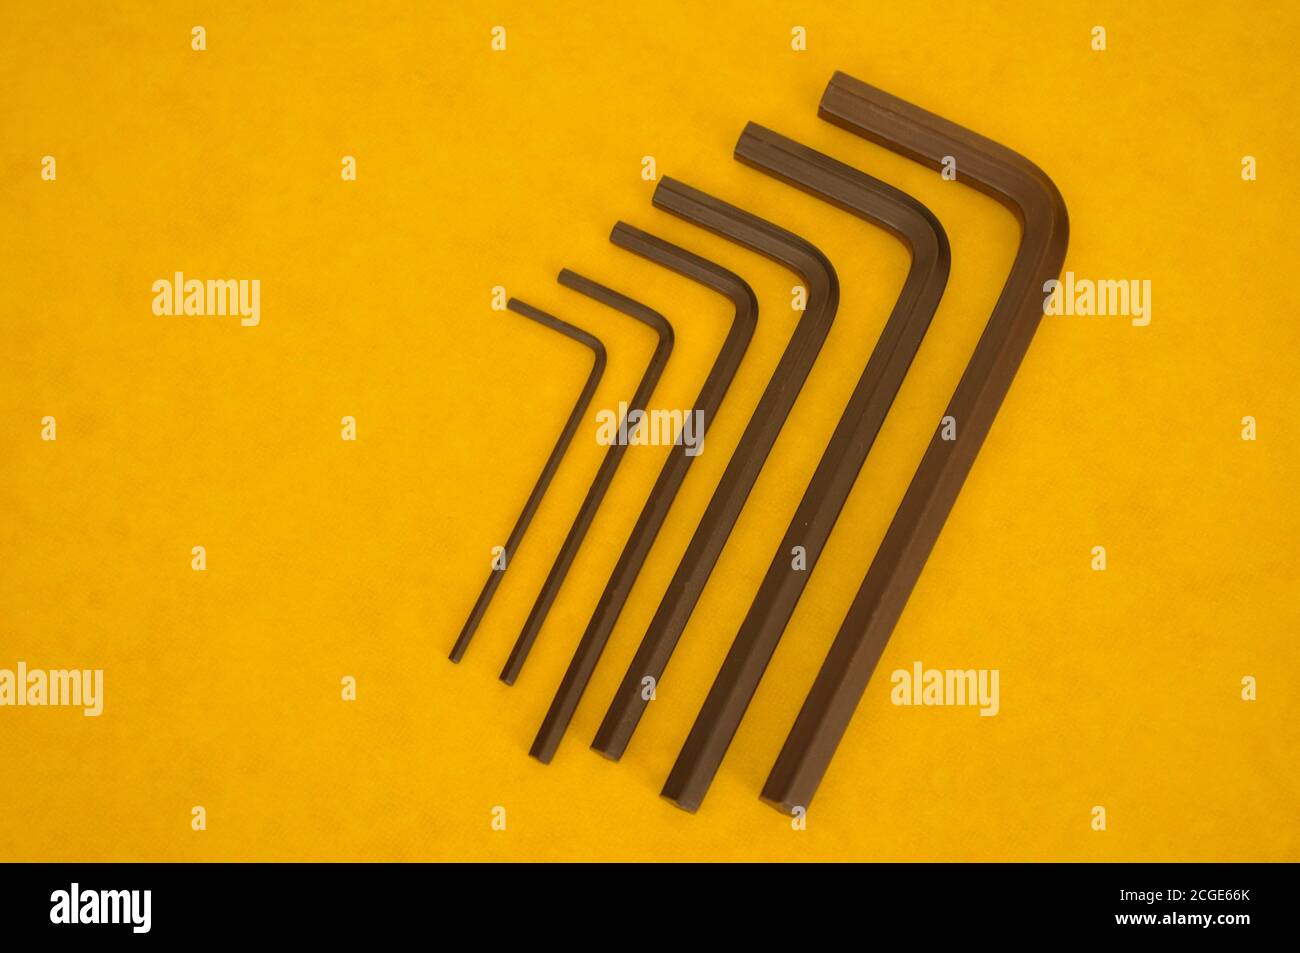 Wrenches or precision tools, six precision tools in ffoto zoom, with yellow background and copy space Stock Photo